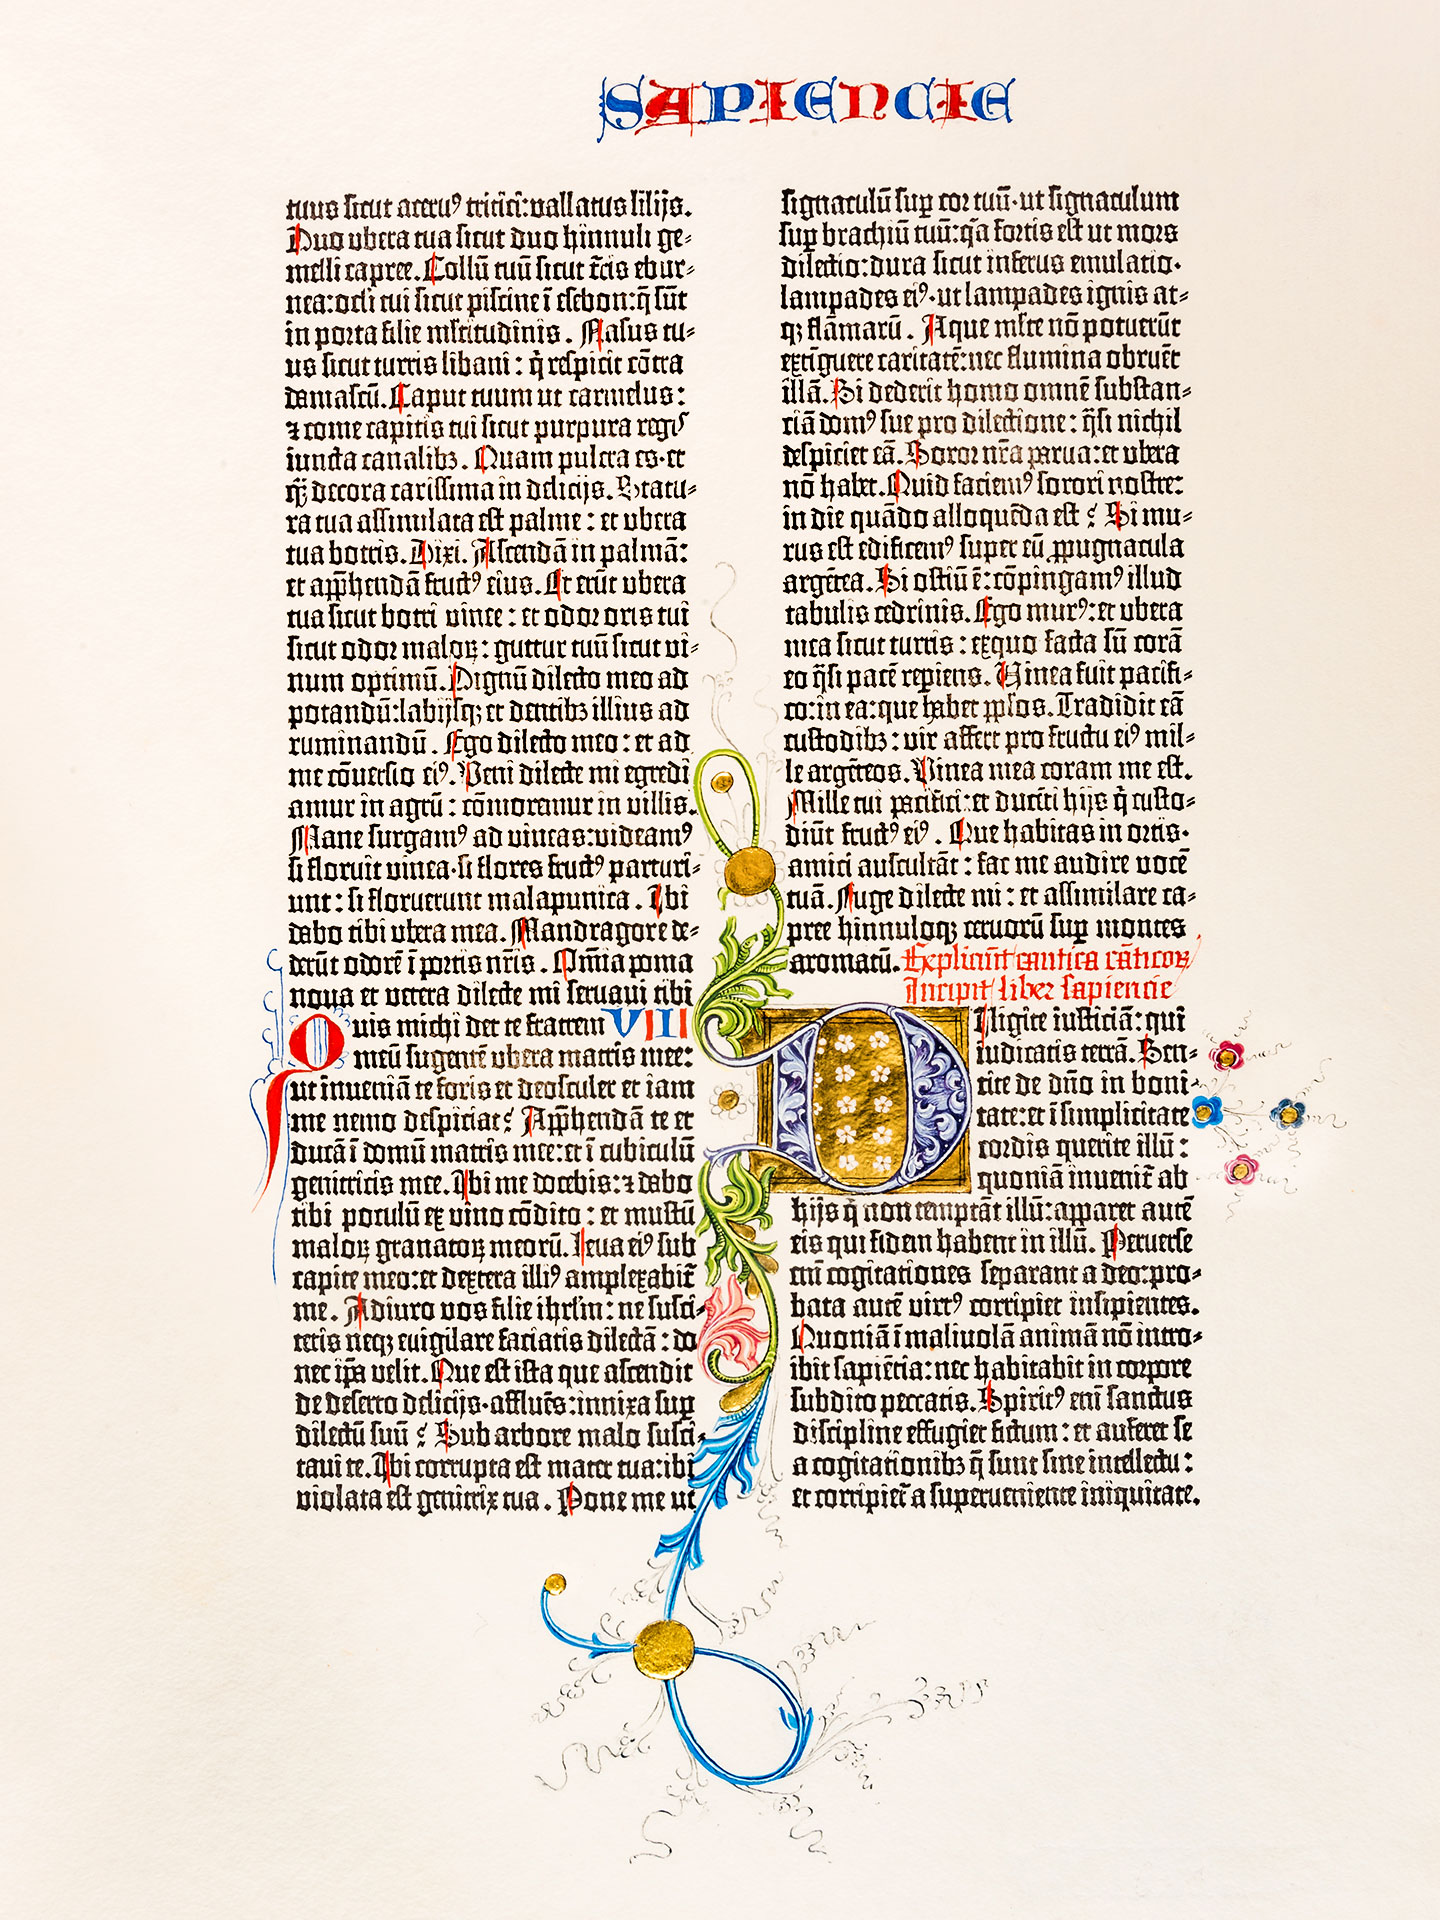 The Book of Wisdom. Ornamental page from the Berlin Gutenberg Bible